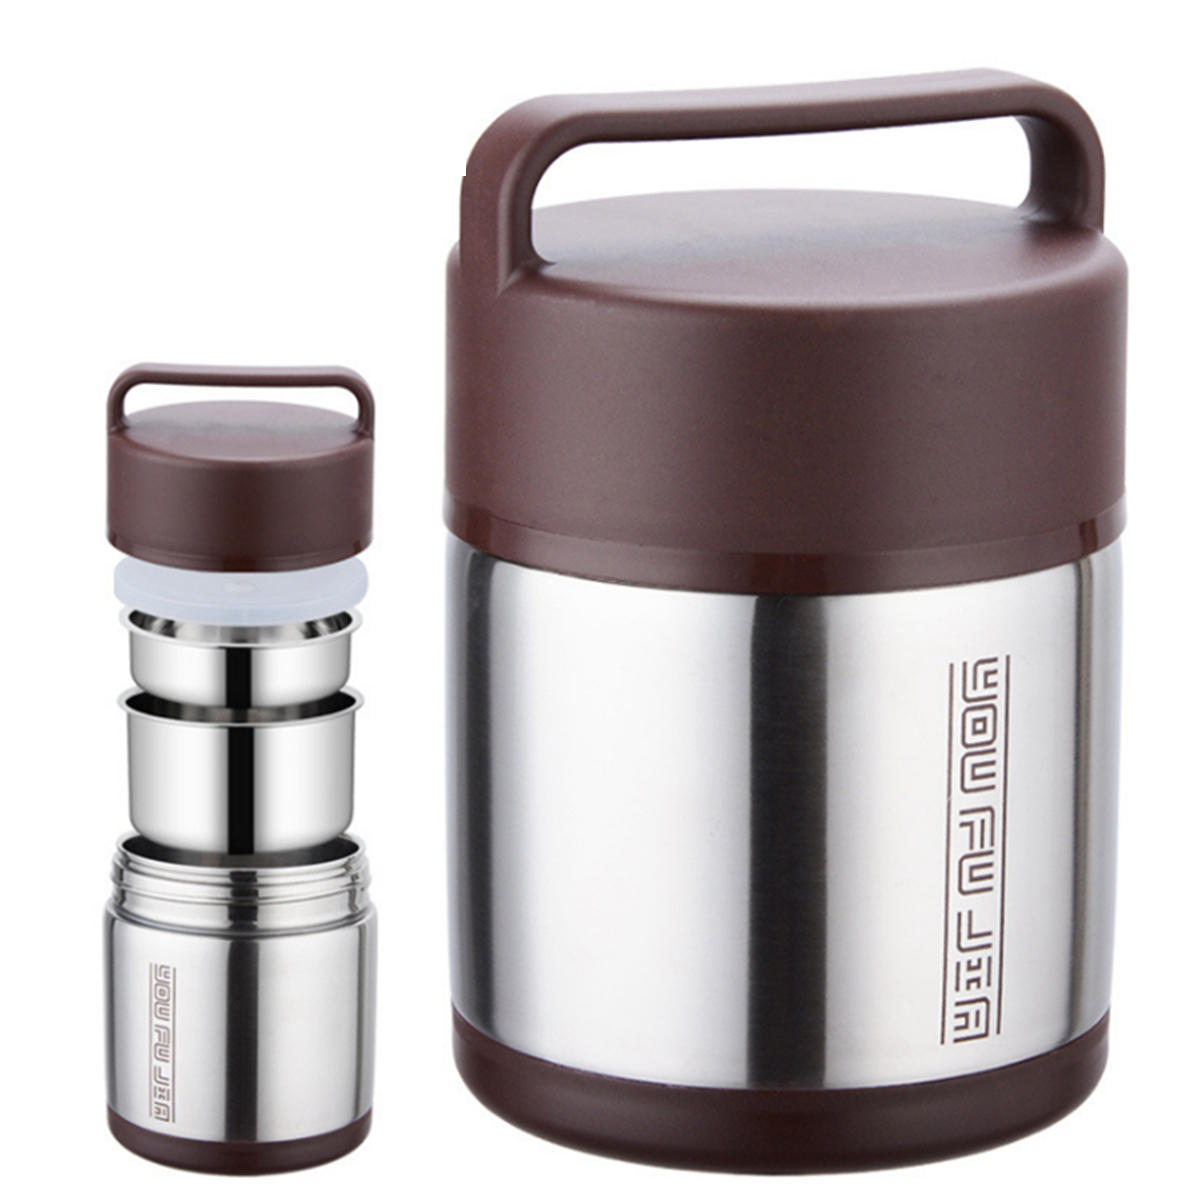 Vacuum Insulated Food Container Sale Online, 60% OFF 